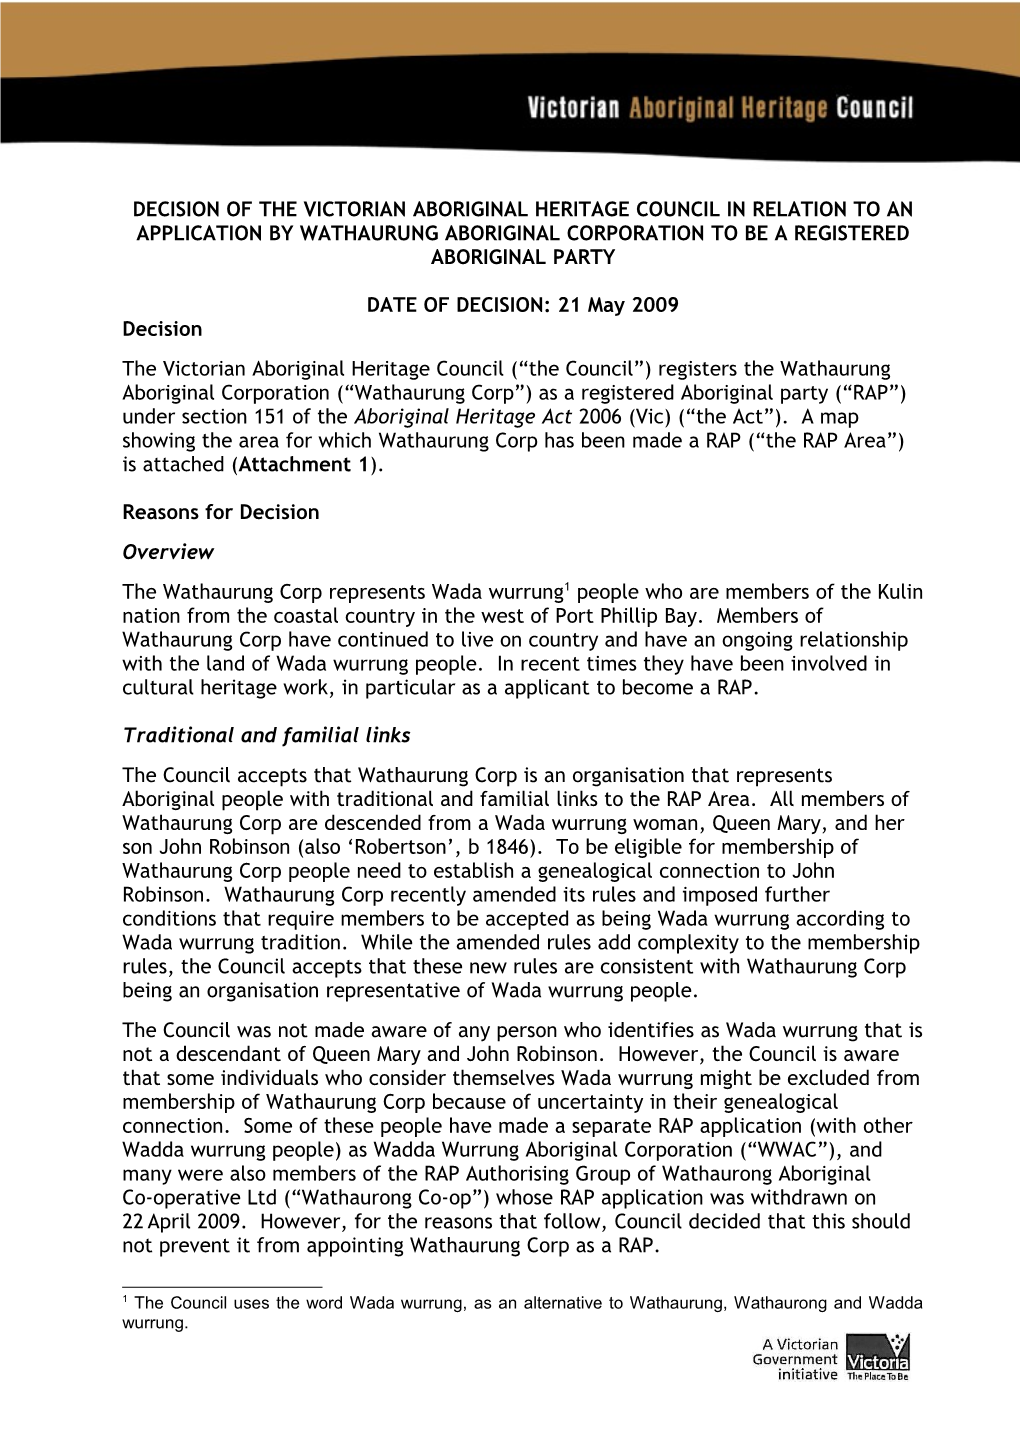 Decision of the Victorian Aboriginal Heritage Council in Relation to an Application By